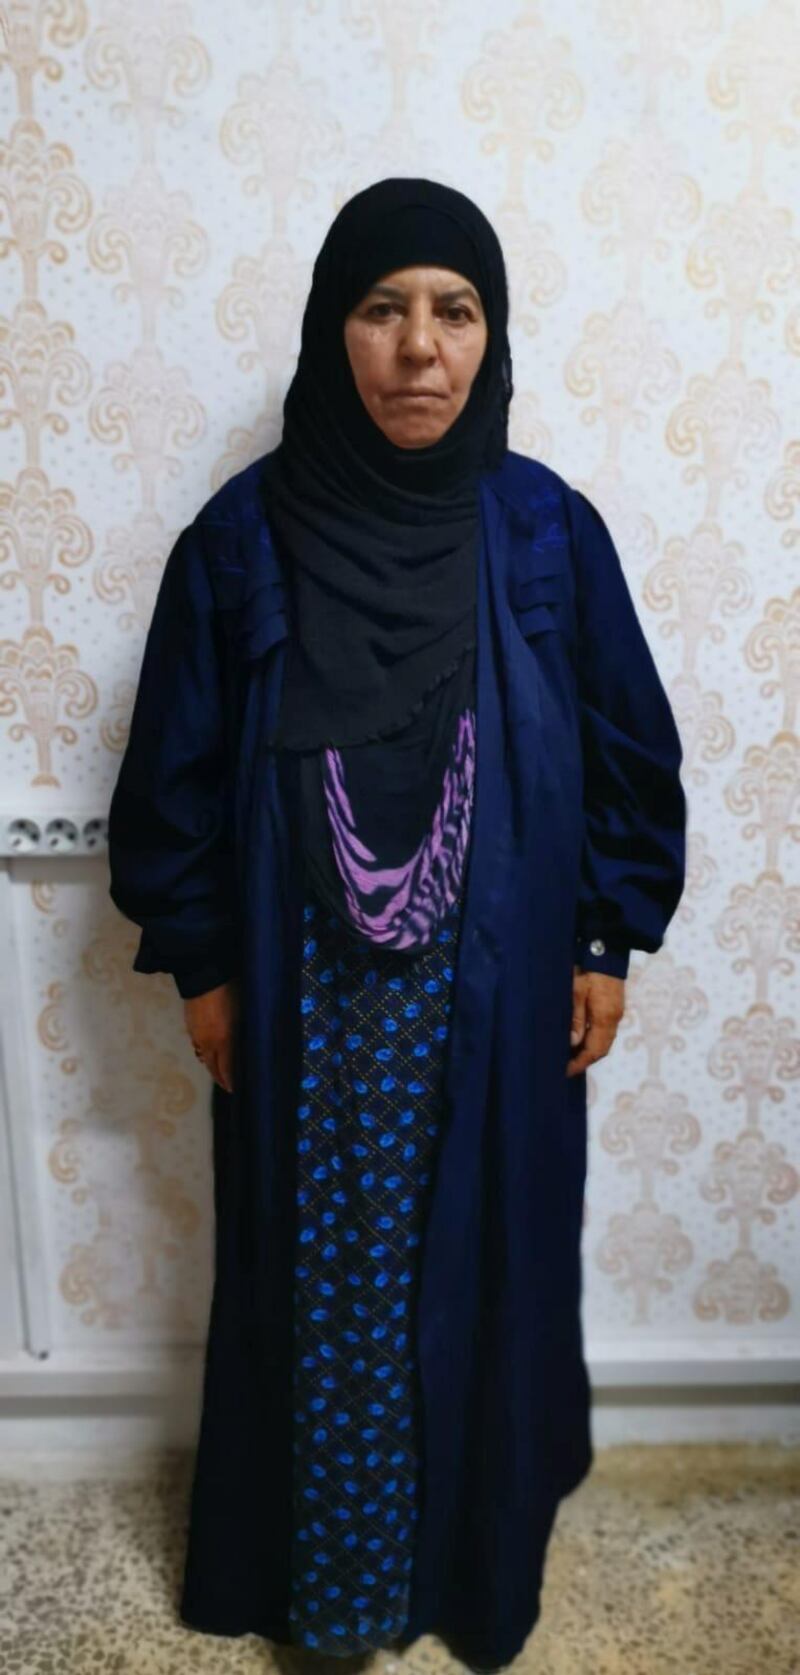 Rasmiya Awad, believed to be the sister of slain Islamic State leader Abu Bakr al-Baghdadi, who was captured on Monday in the northern Syrian town of Azaz by Turkish security officials, is seen in an unknown location in an undated picture provided by Turkish security officials. Turkish Security Officials/Handout via REUTERS ATTENTION EDITORS - THIS IMAGE HAS BEEN SUPPLIED BY A THIRD PARTY.